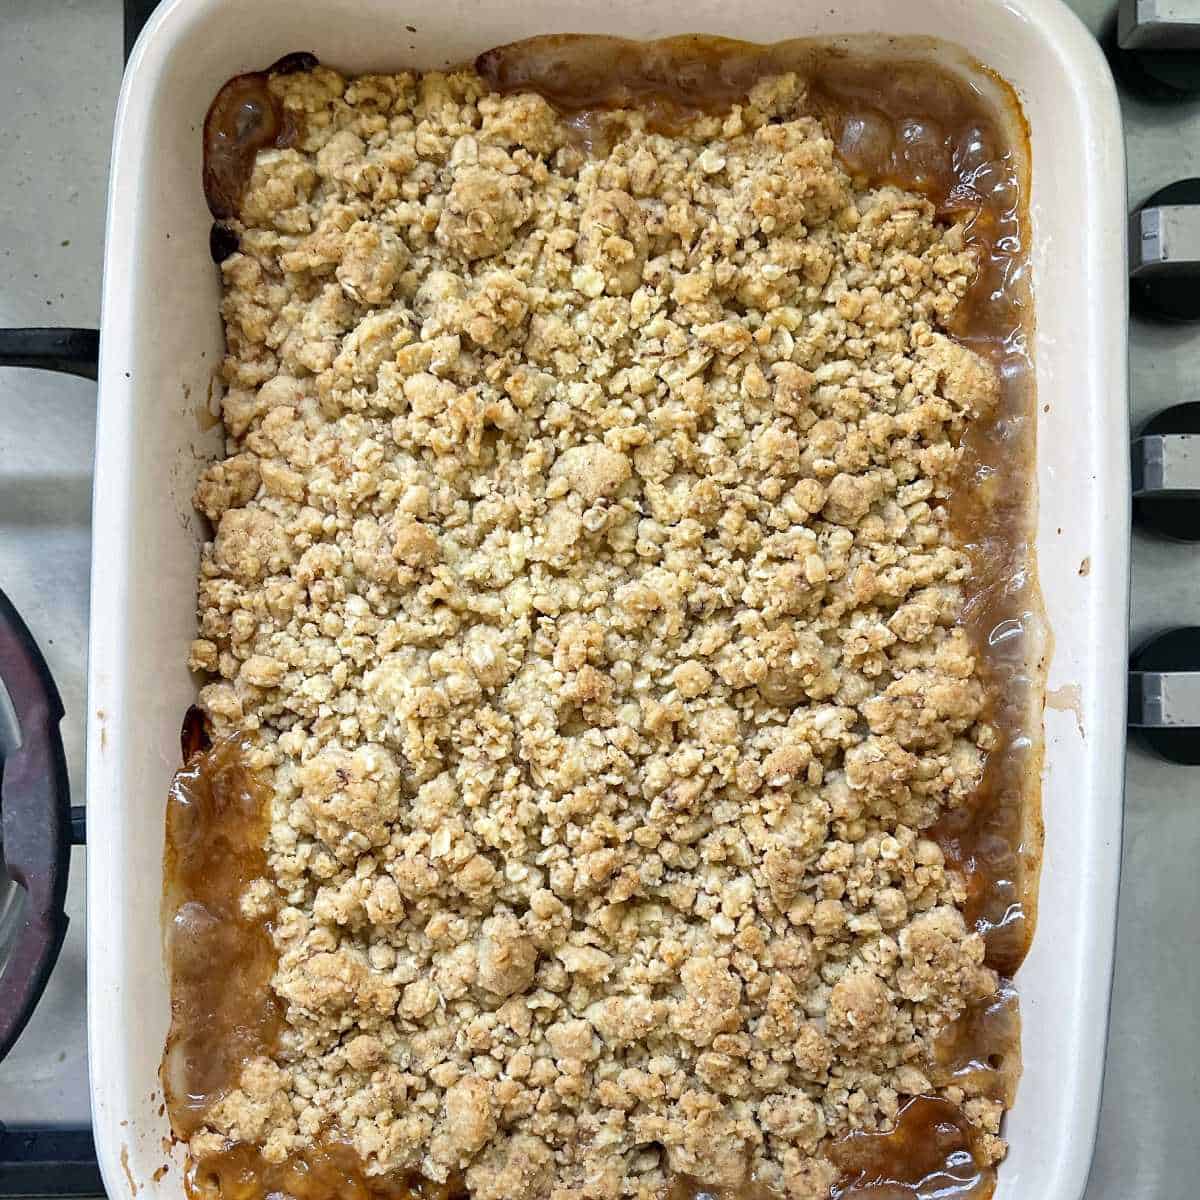 Cooked apricot crumble just removed from the oven